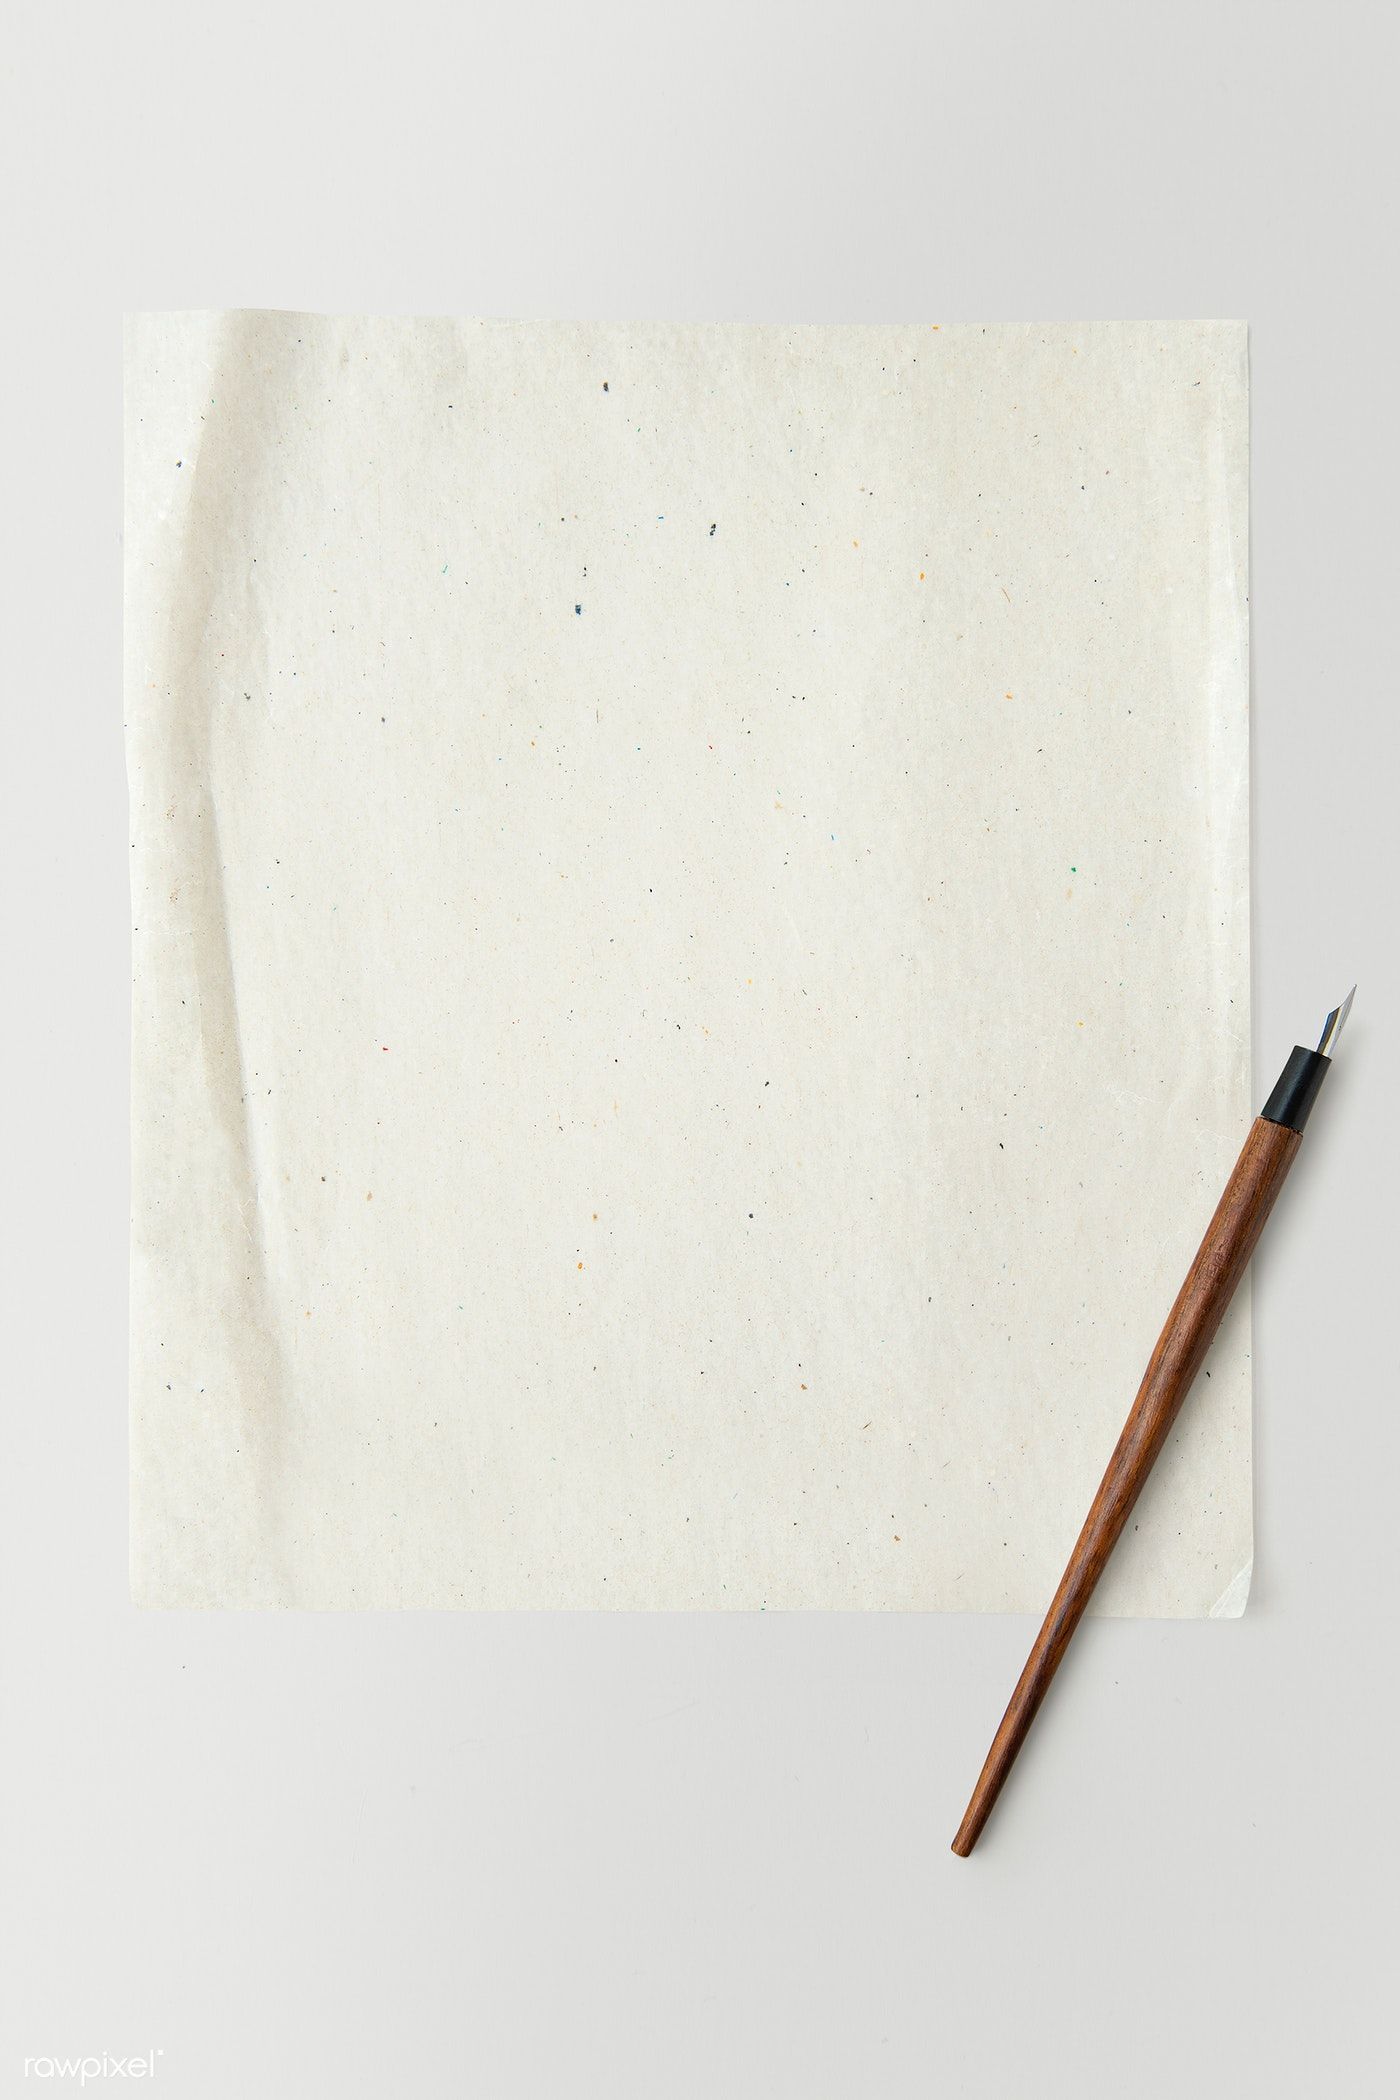 Download premium psd of Blank plain white paper with fountain pen. Paper , Background image for quotes, Pen and paper